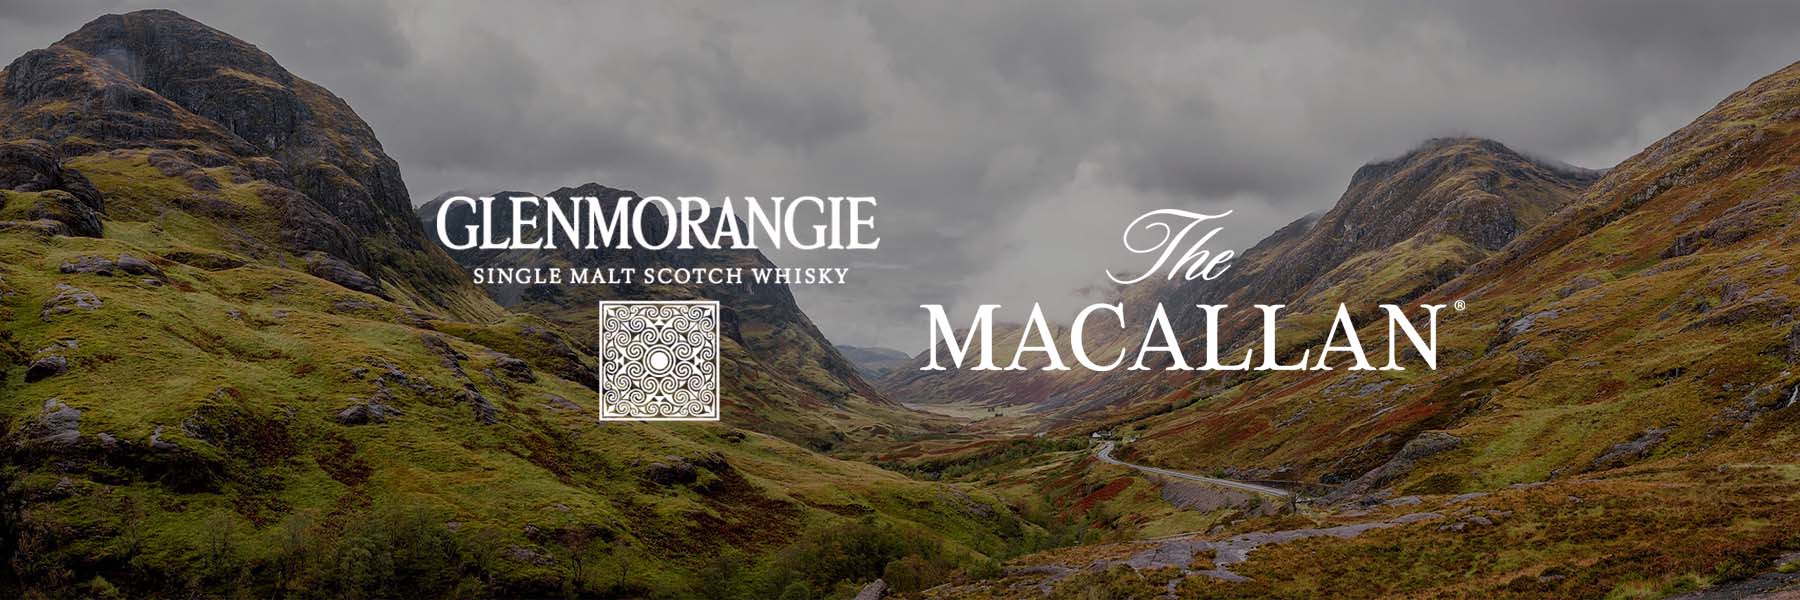 Glenmorangie vs Macallan | Which will come out on top?